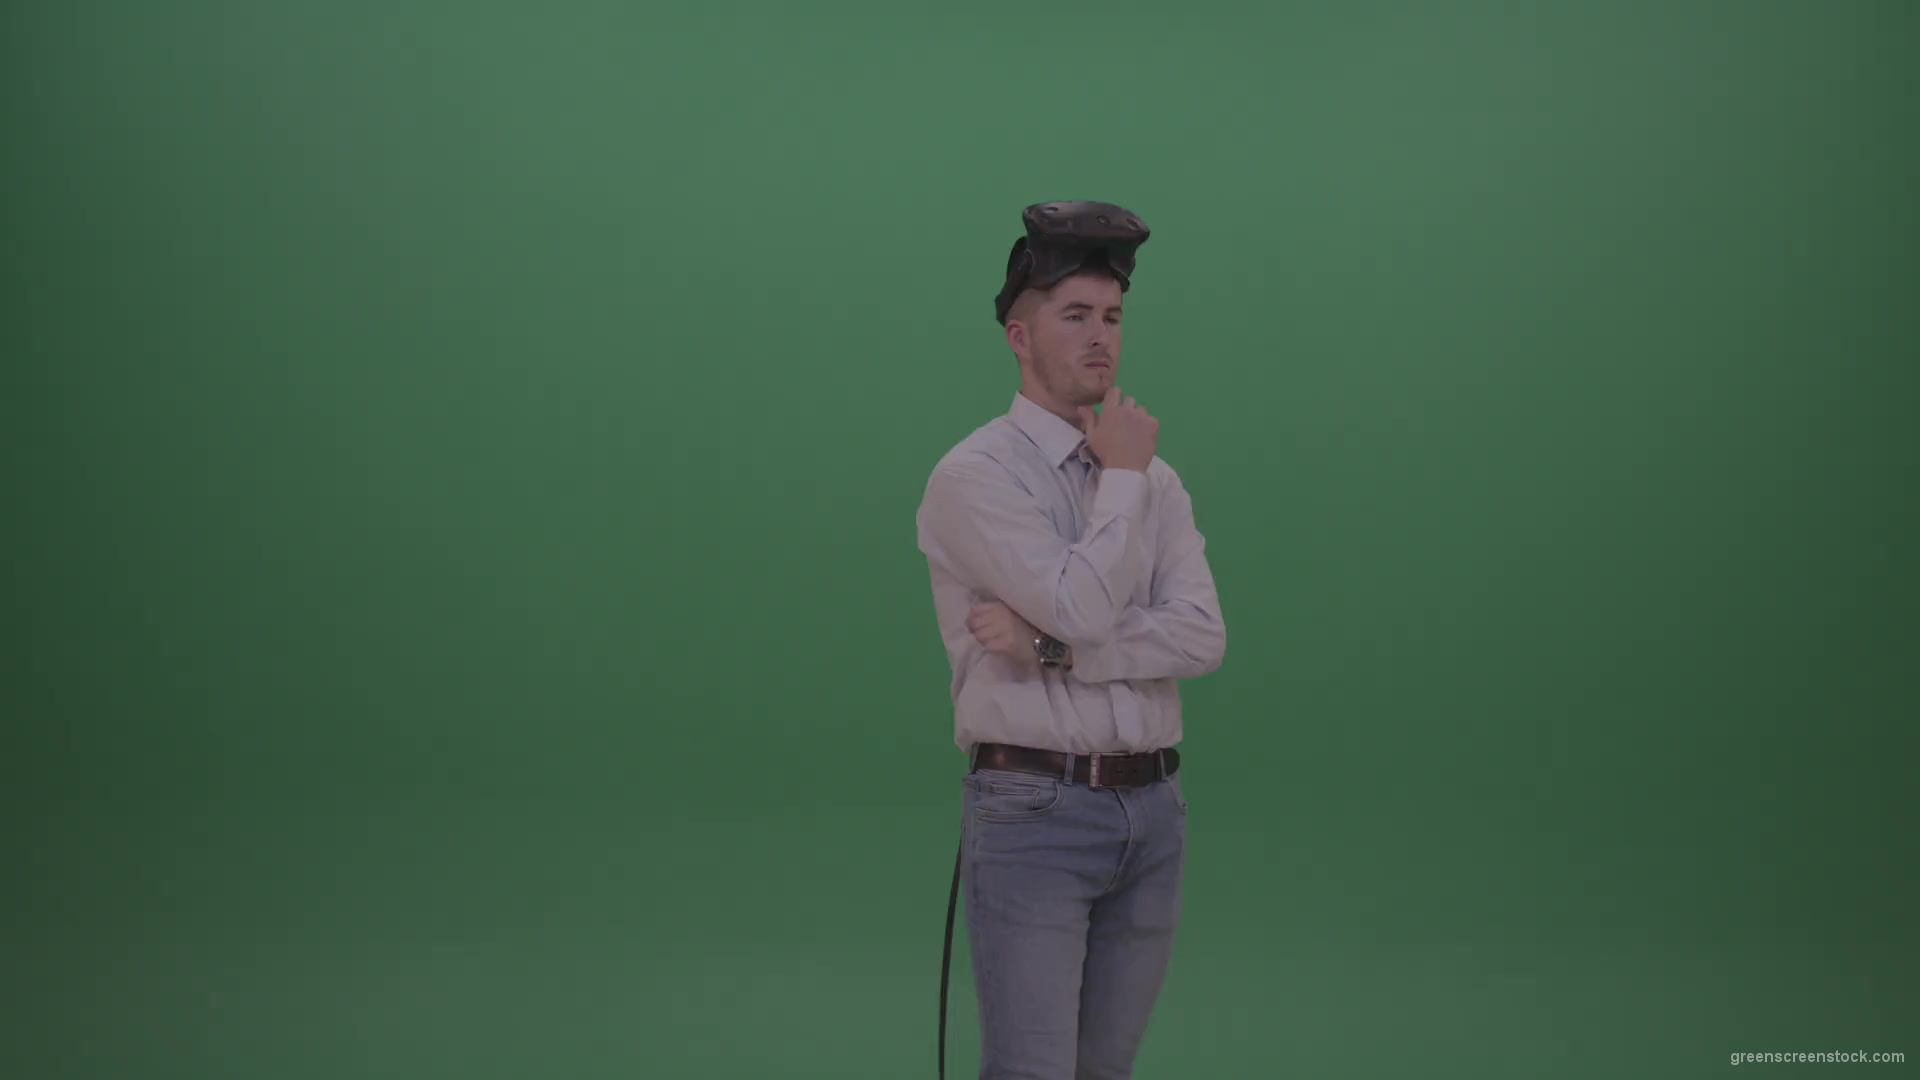 Young_Man_Wearing_White_Shirt_Making_Hard_Decision_Using_Virtual_Glasses_To_Solve_The_Task_Green_Screen_Wall_Chroma_Key_Background-1920_001 Green Screen Stock